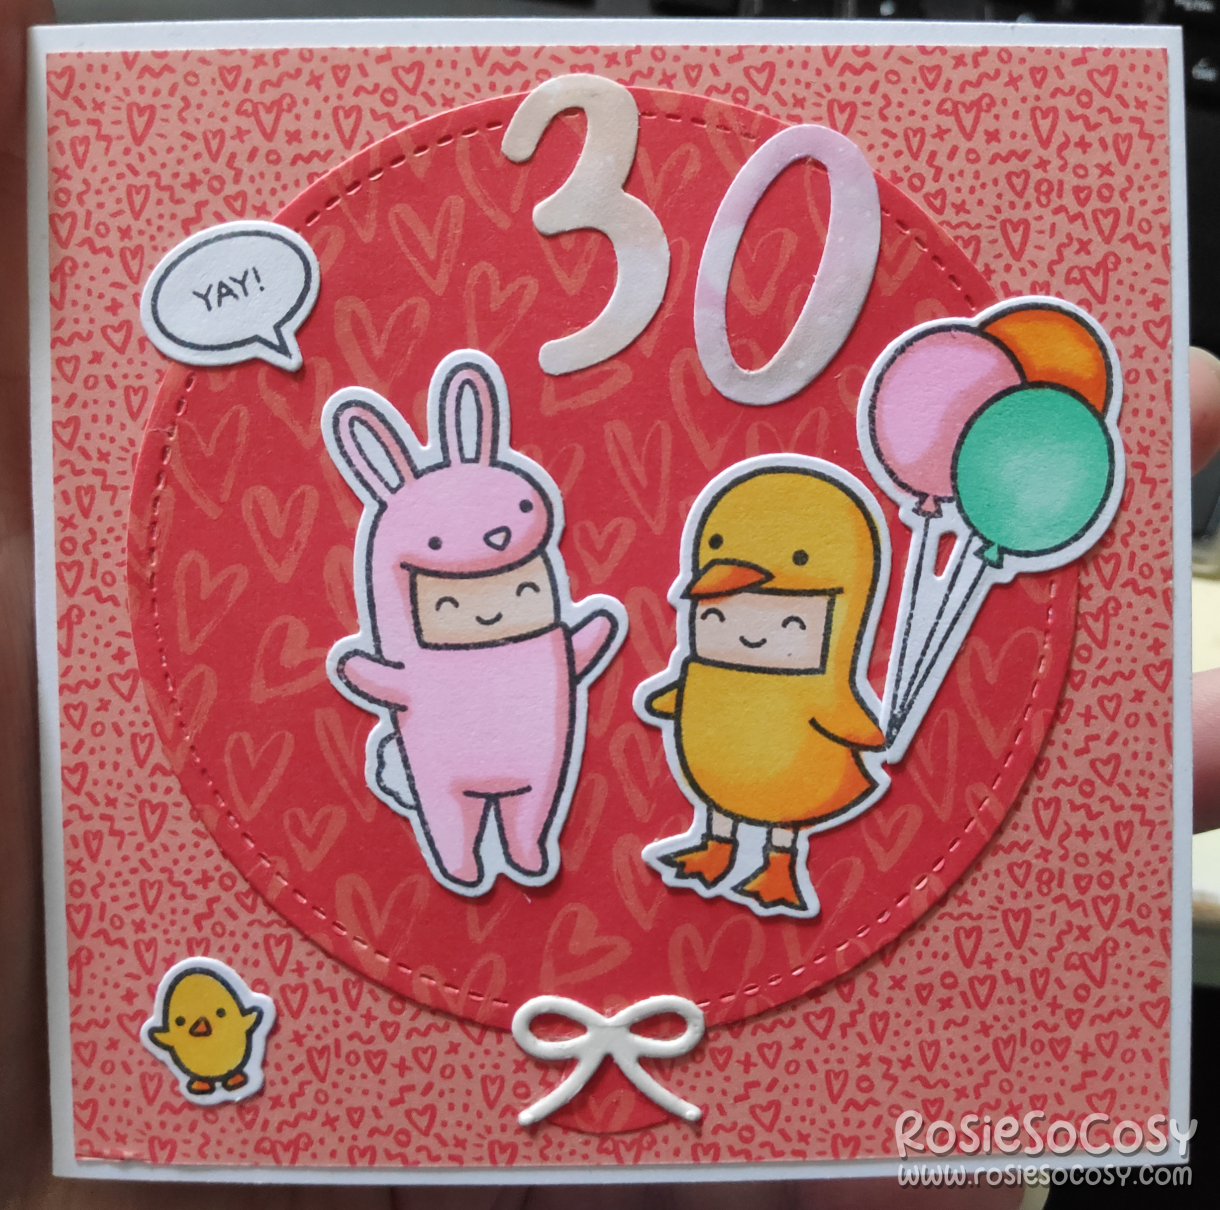 A red birthday card with two characters, dressed up as a pink bunny and a yellow chick. Above it there's 30 in white. The background is a red balloon. There's a small yellow chick in the bottom left corner. The character with yellow chick is holding 3 balloons in pink, orange and turquoise.